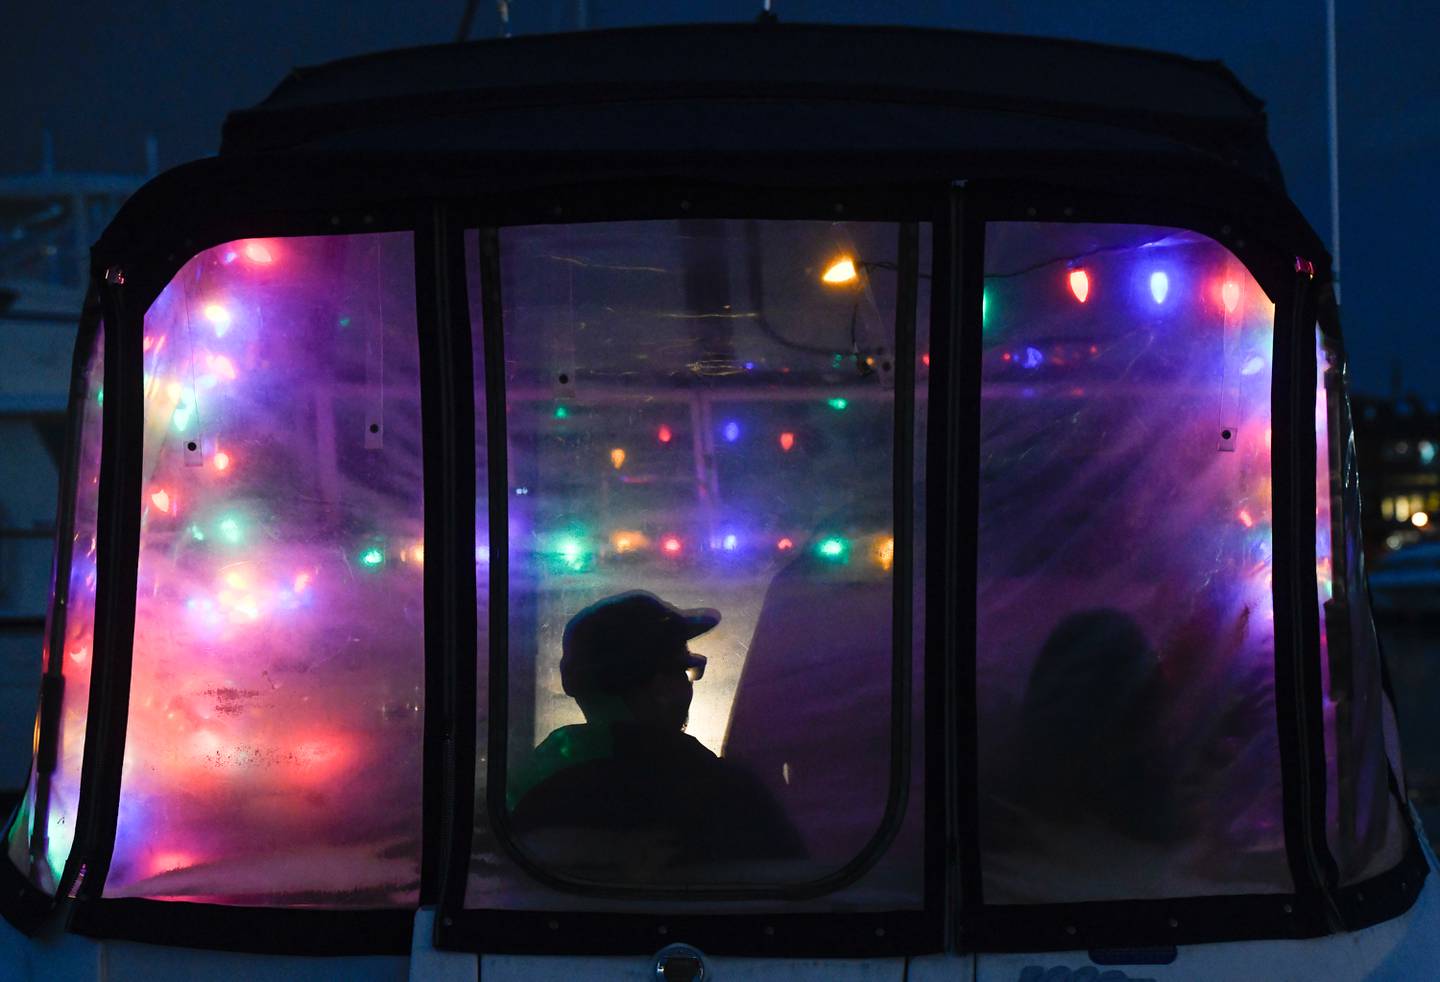 Andrew Herr, who lives in Lancaster, Pa. but spends most of his weekends in Baltimore, waits in his boat at Anchorage Marina in Canton for the start of the Baltimore Lighted Boat Parade, Saturday, Dec. 3, 2022.